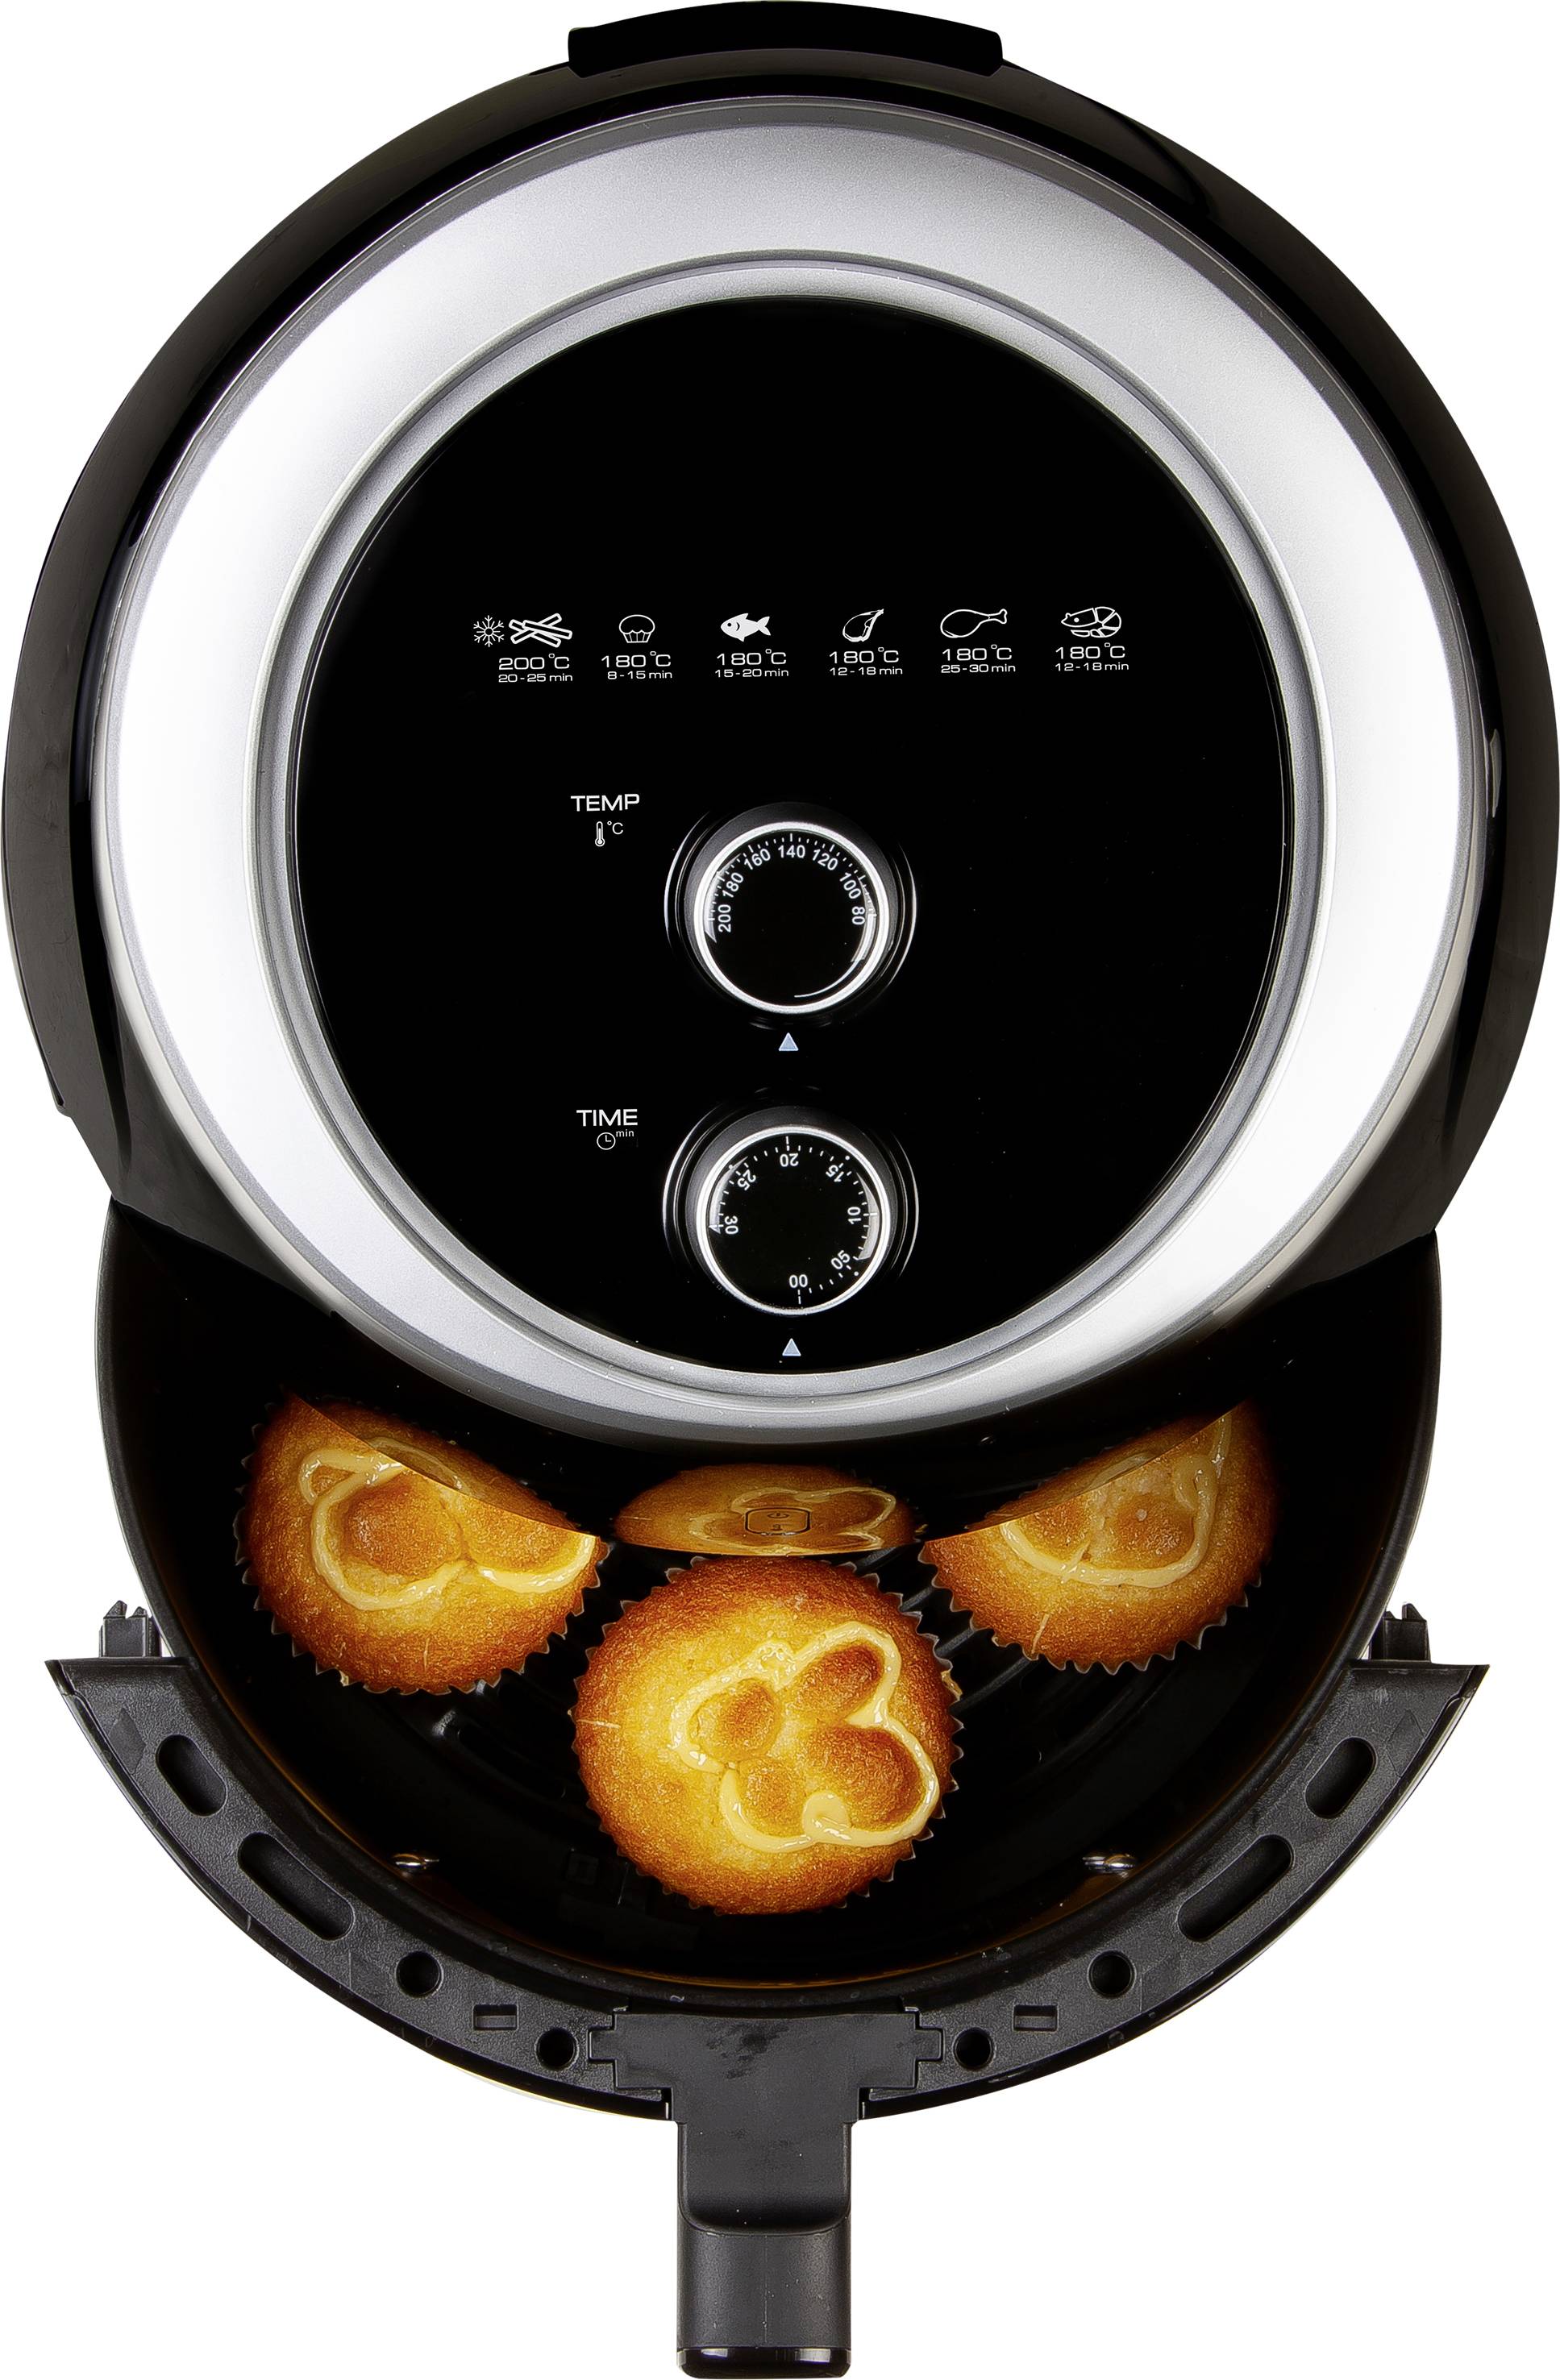 kamp Grijpen mentaal DOMO Deli-Freyer XXL Deep fryer Timer fuction, with display, Cool touch  housing, Non-stick coating, Overheat protection | Conrad.com